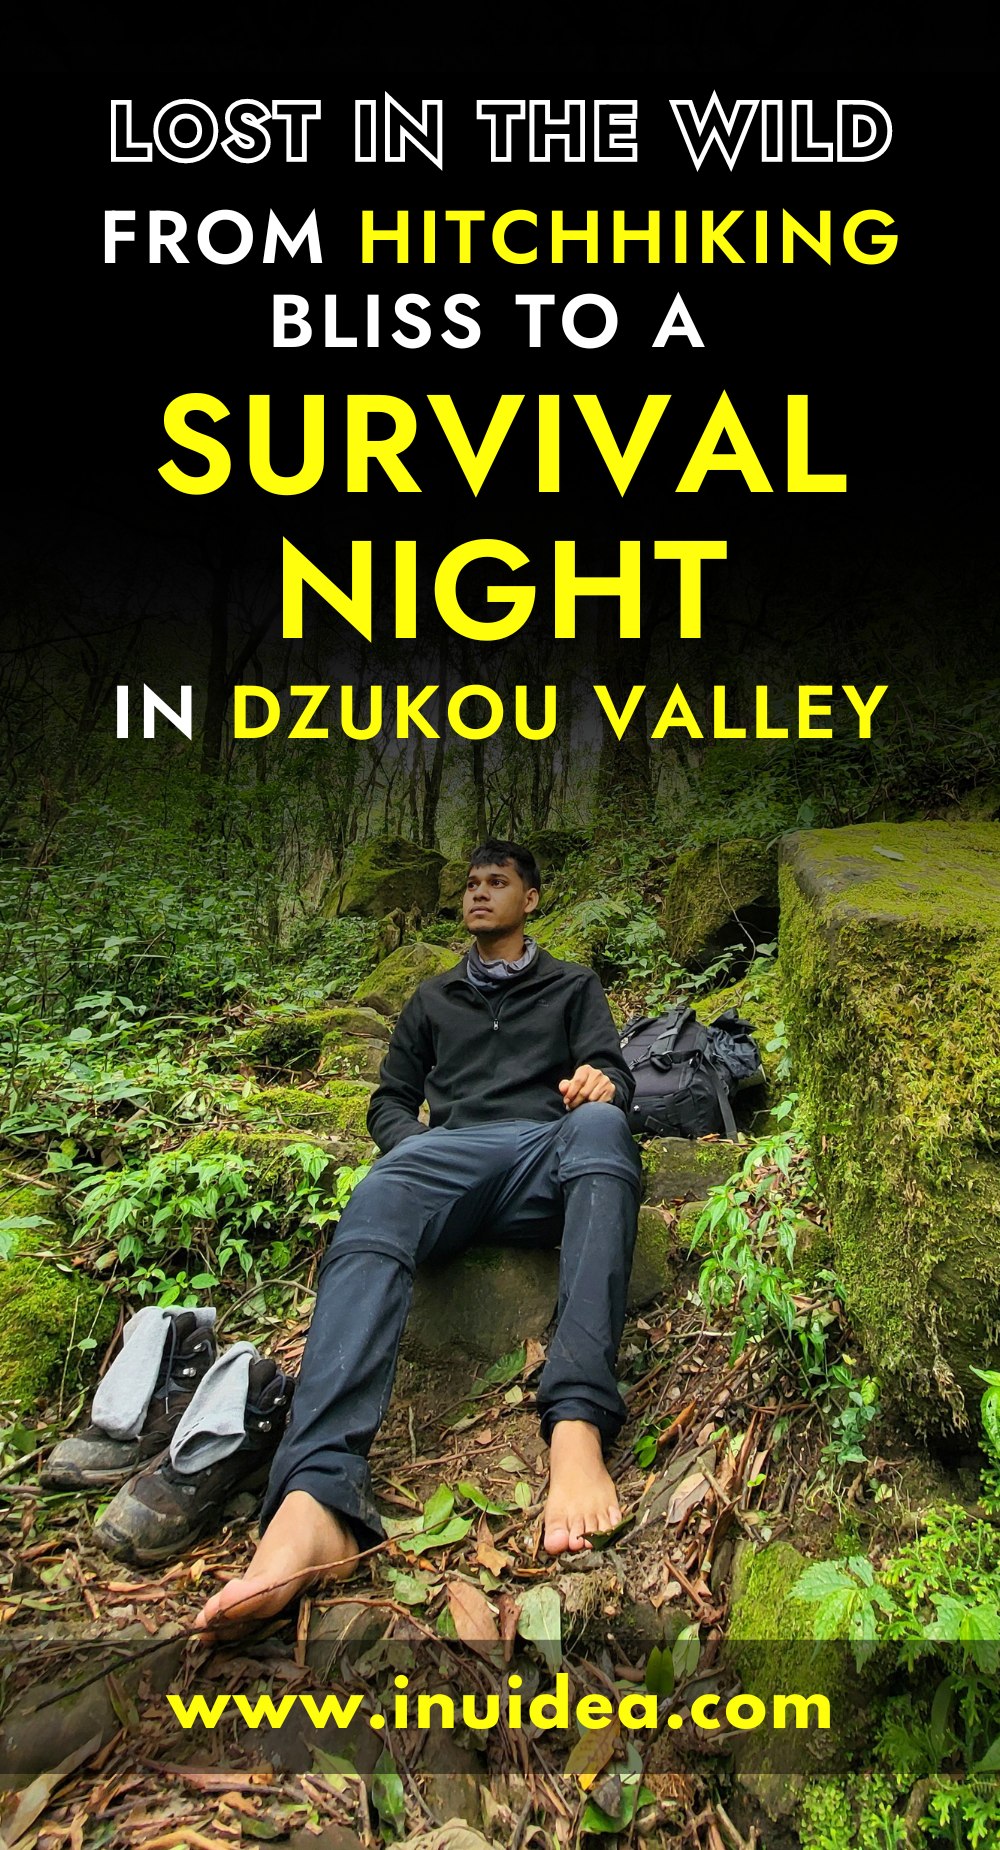 From Hitchhiking Bliss to a Survival Night in Dzukou Valley: Lost in the Wild